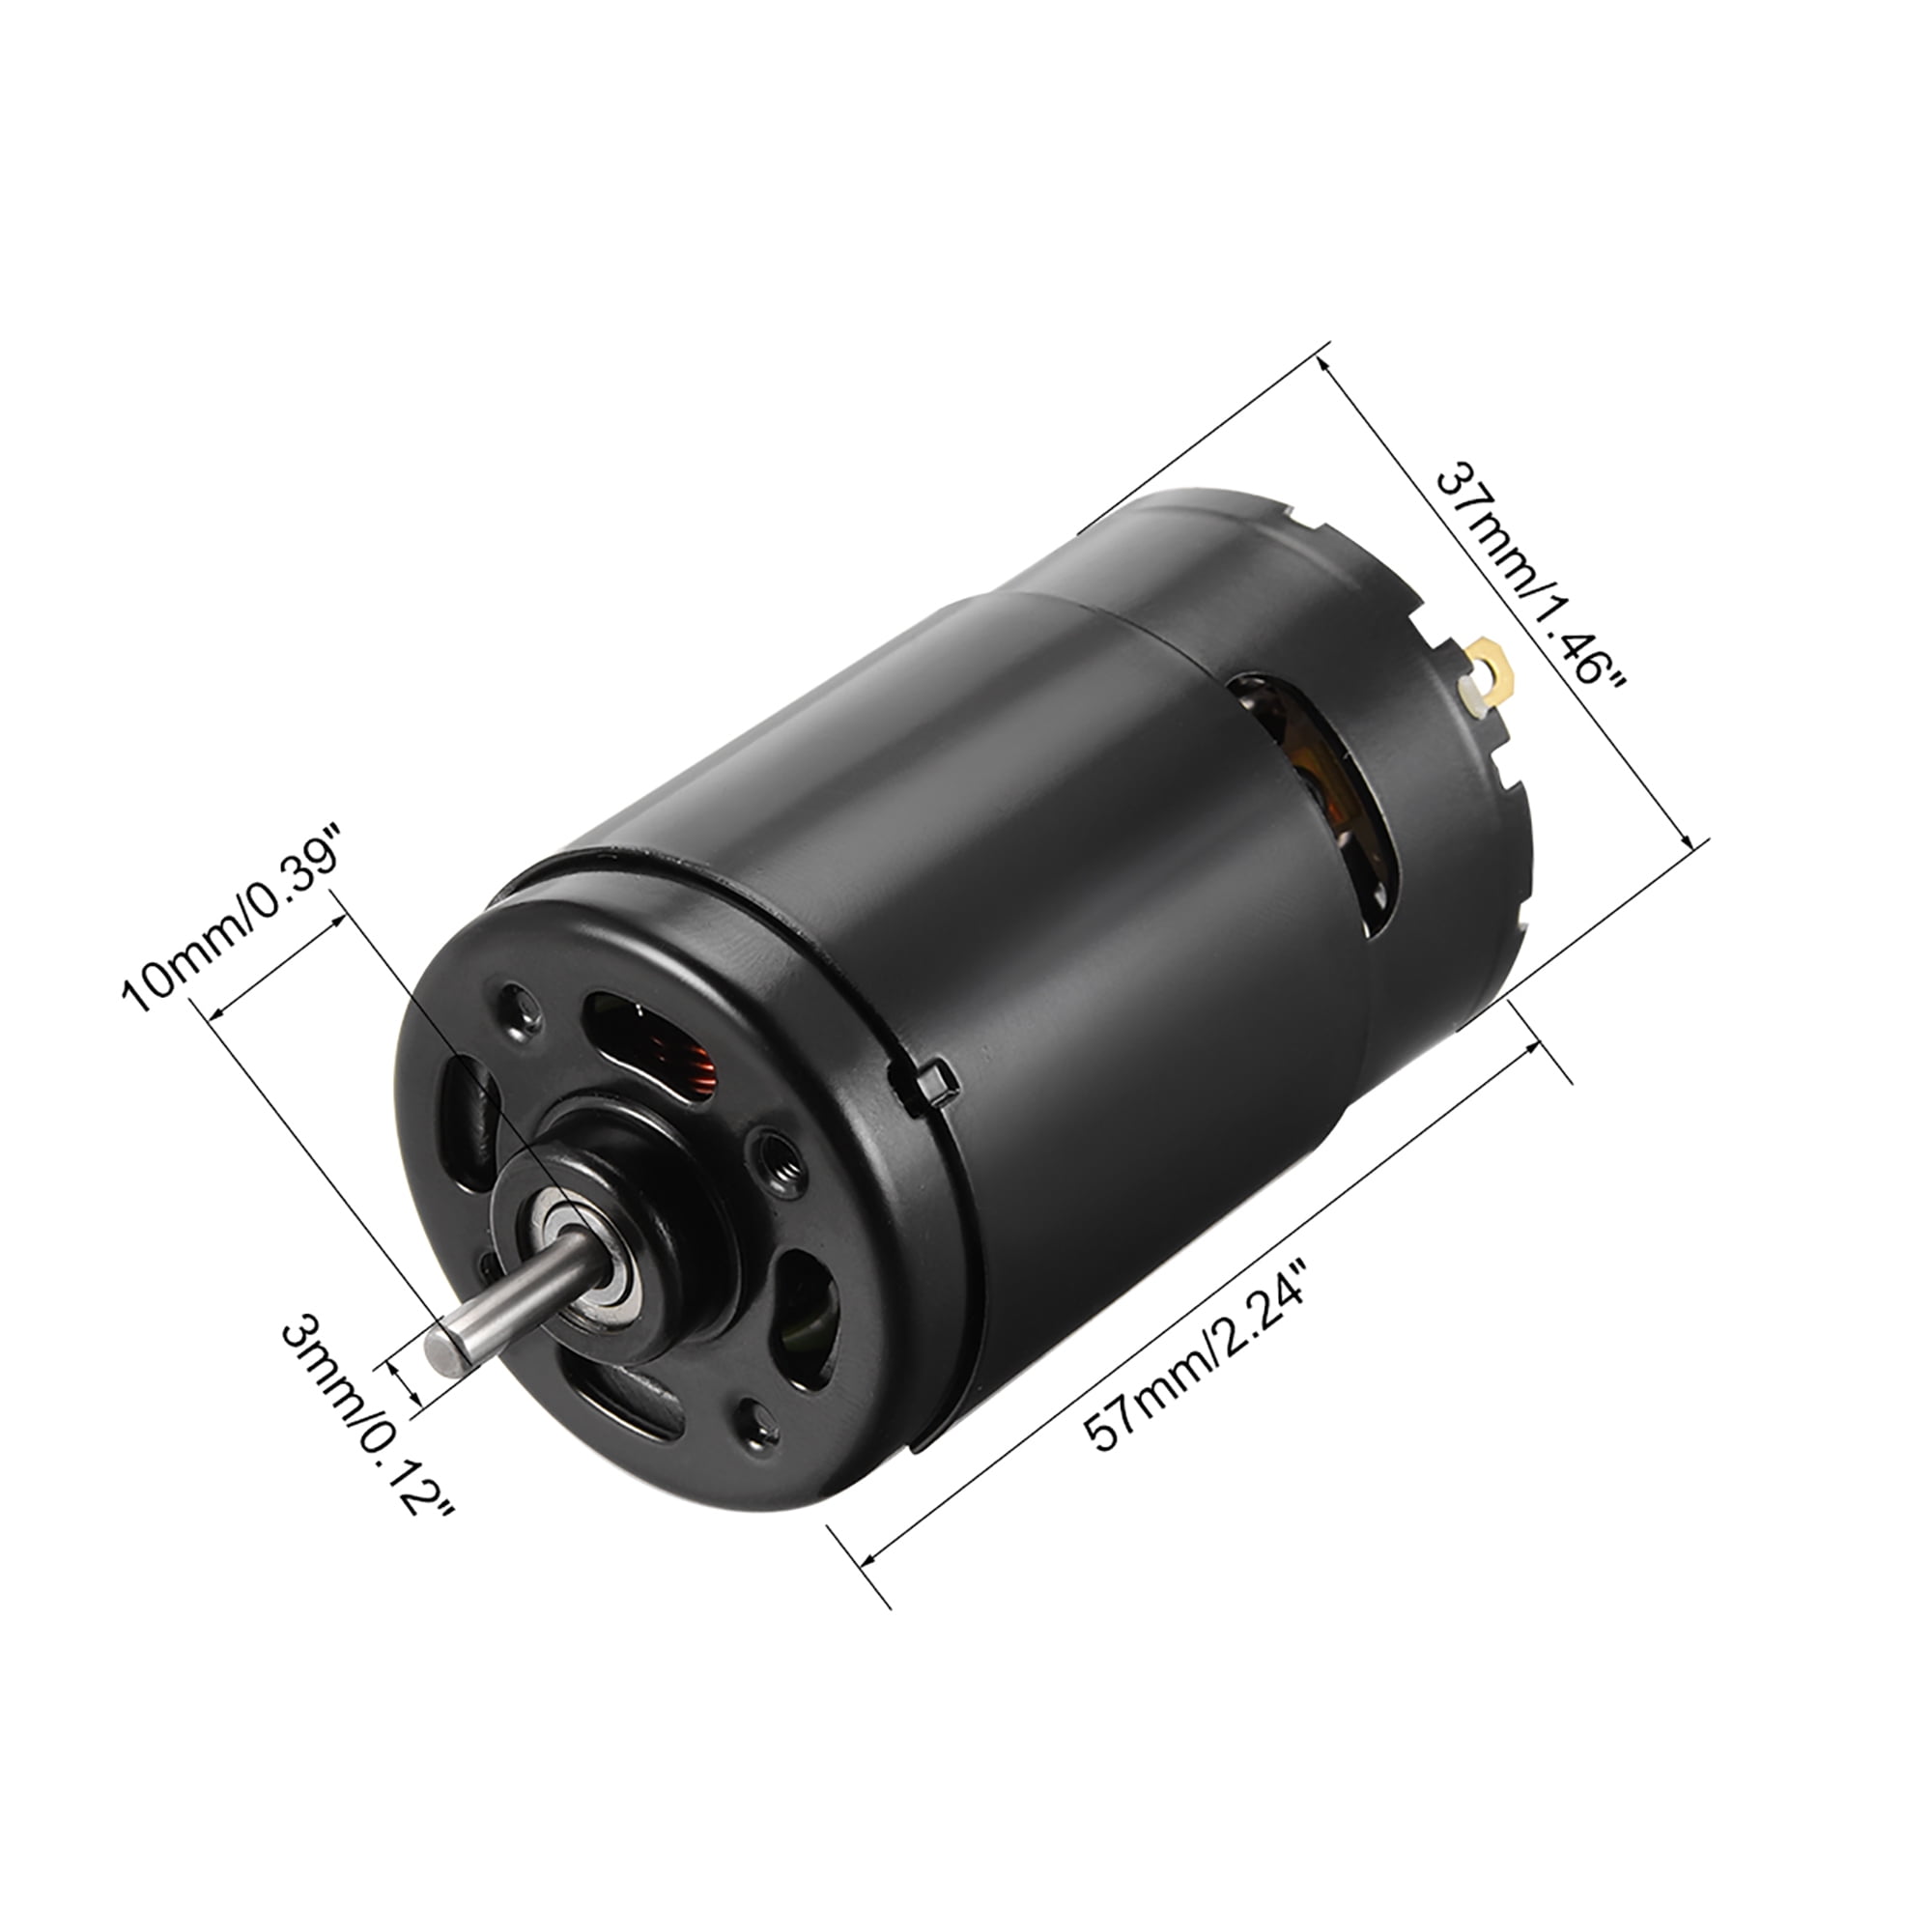 Details about   DC 3-12V 4300-32000RPM Motor Electric Motor Round Shaft for RC Boat Toys Model 